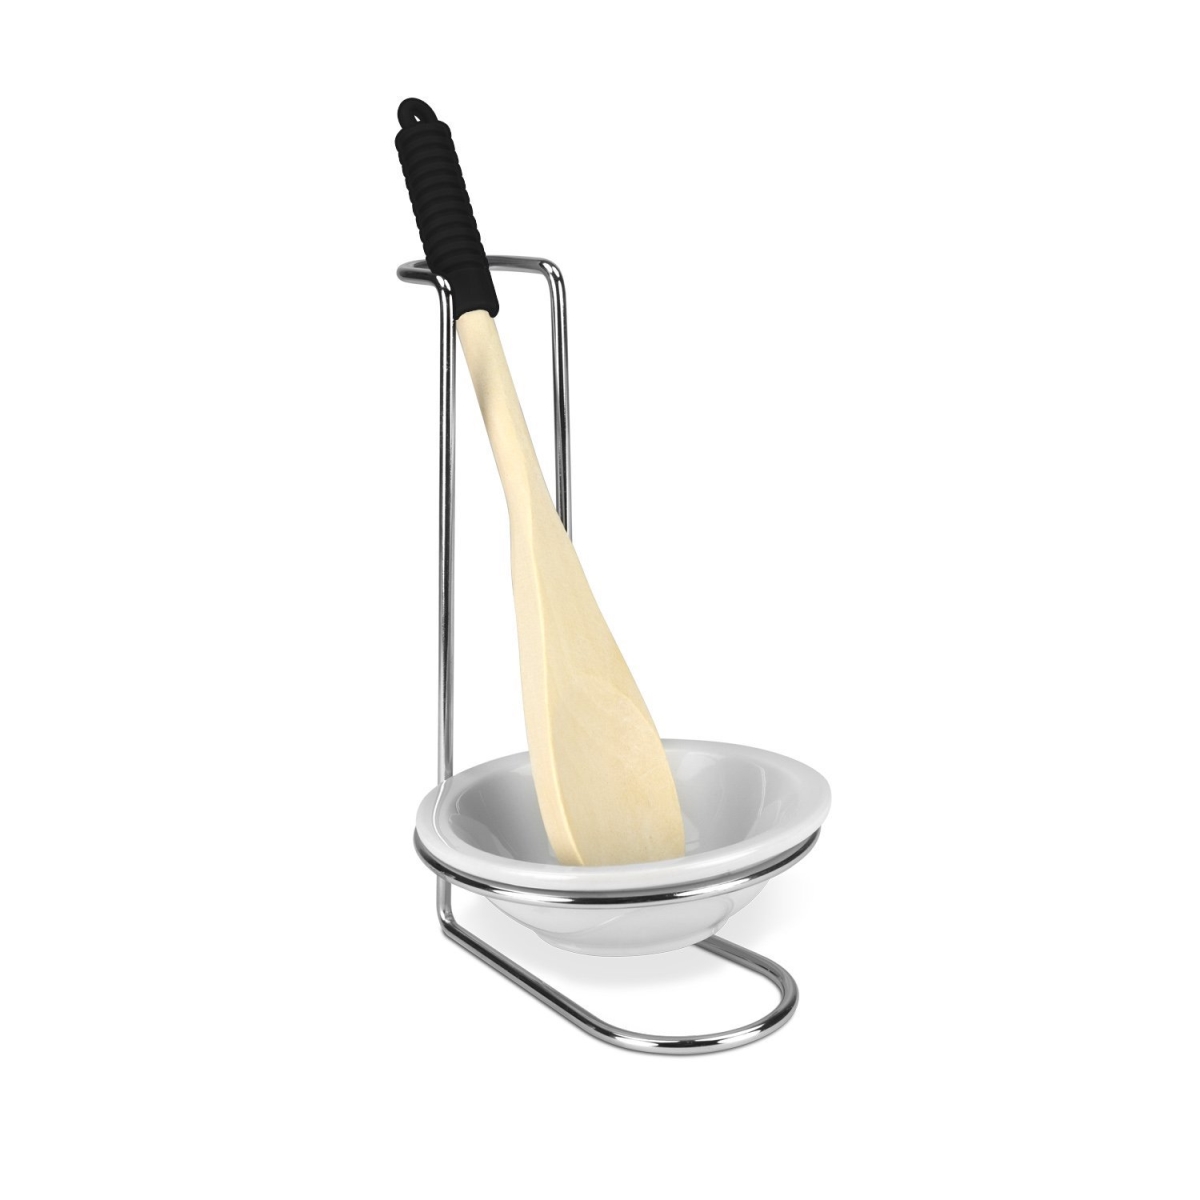 Sr41187 Spoon Rest With Ceramic Tray